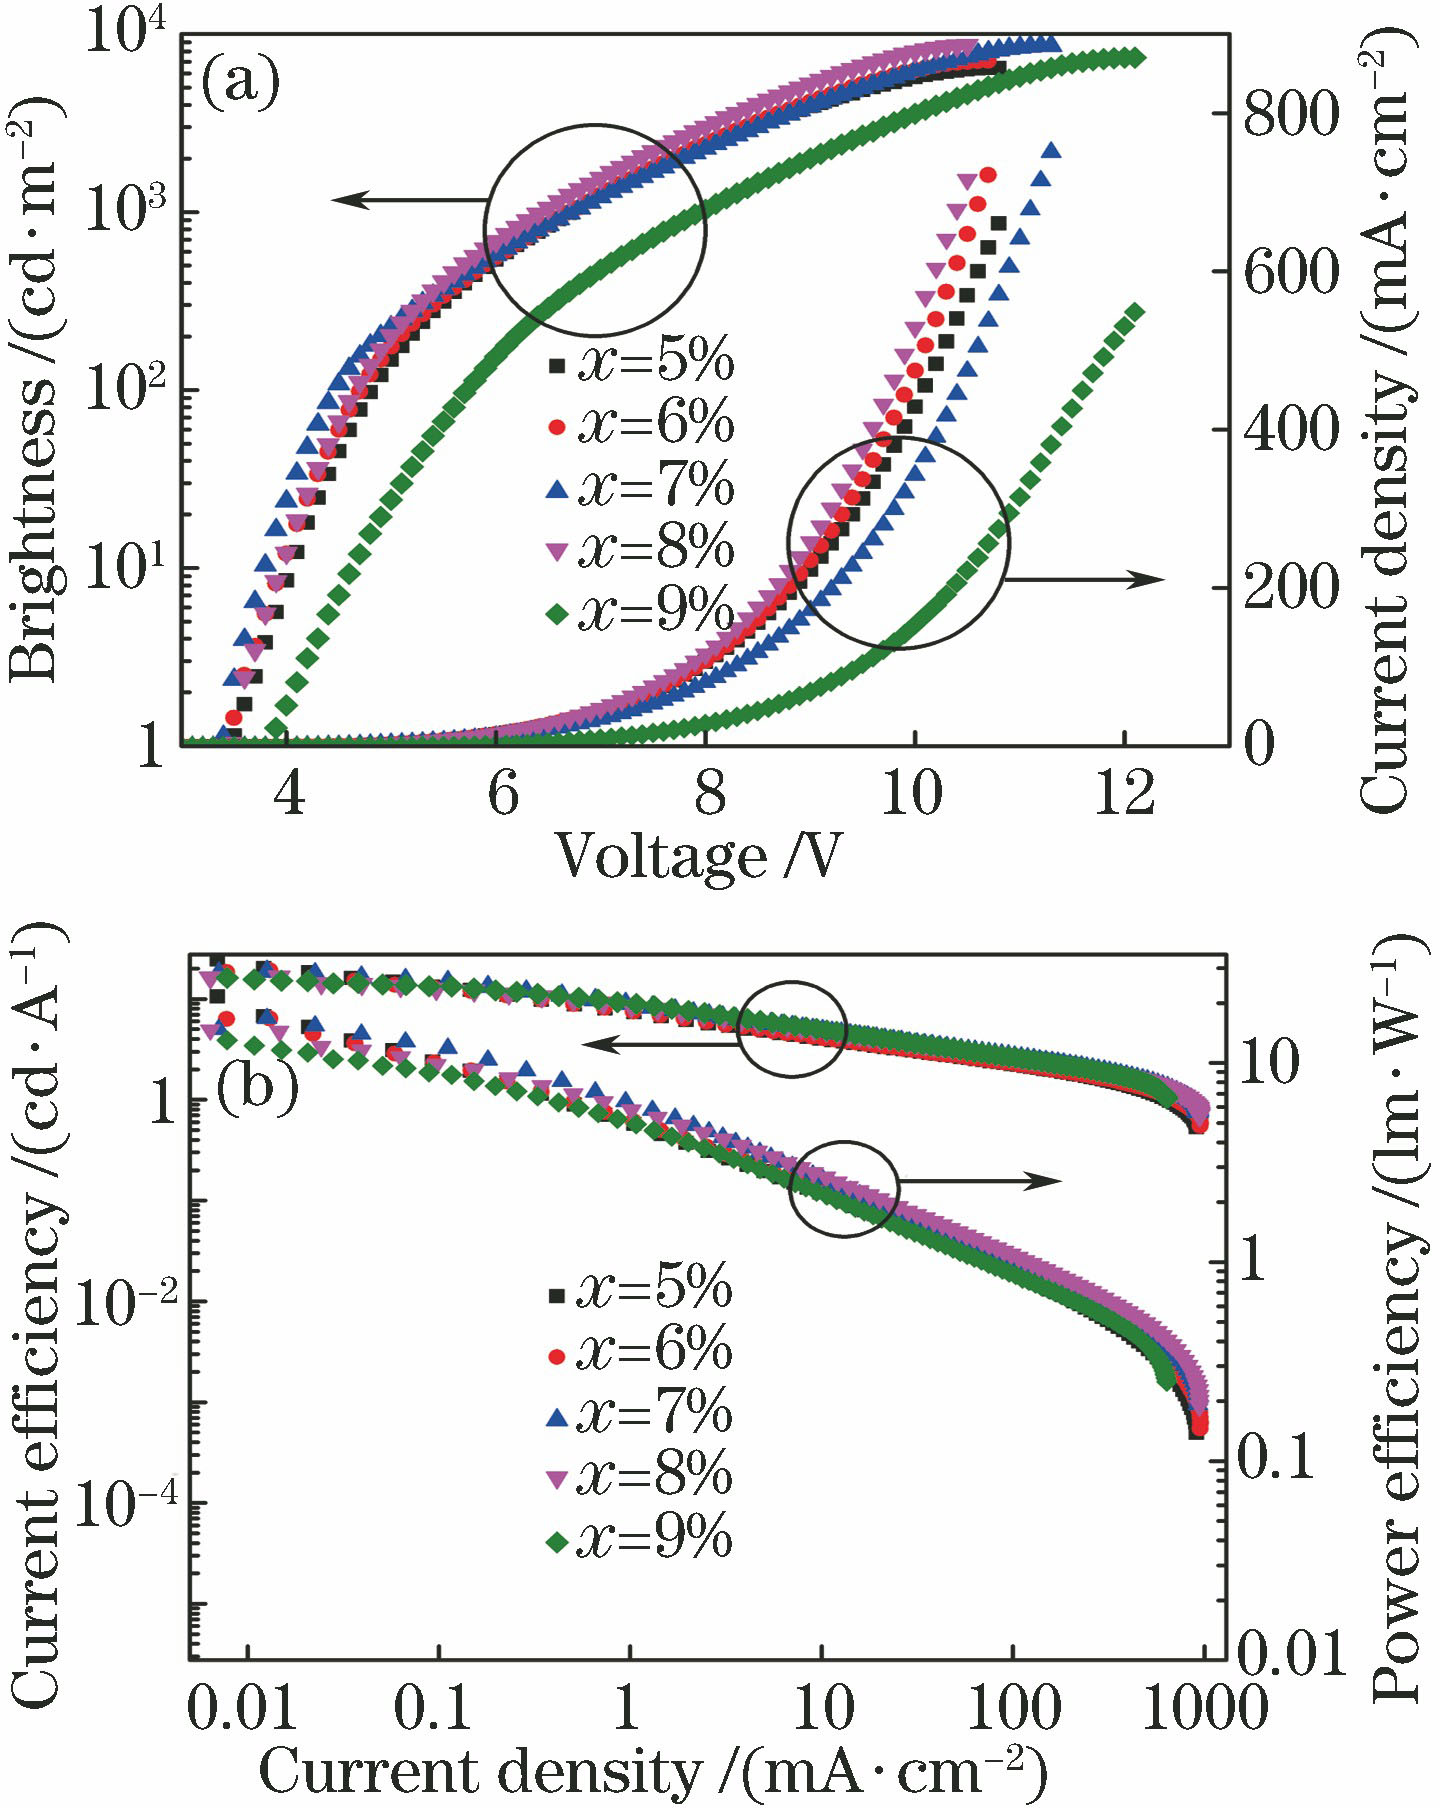 Performances of TXO-PhCz doped CzSi single-emitting layer devices with different concentrations. (a) Relationship among voltage, brightness, and current density; (b) relationship among current density, current efficiency, and power efficiency